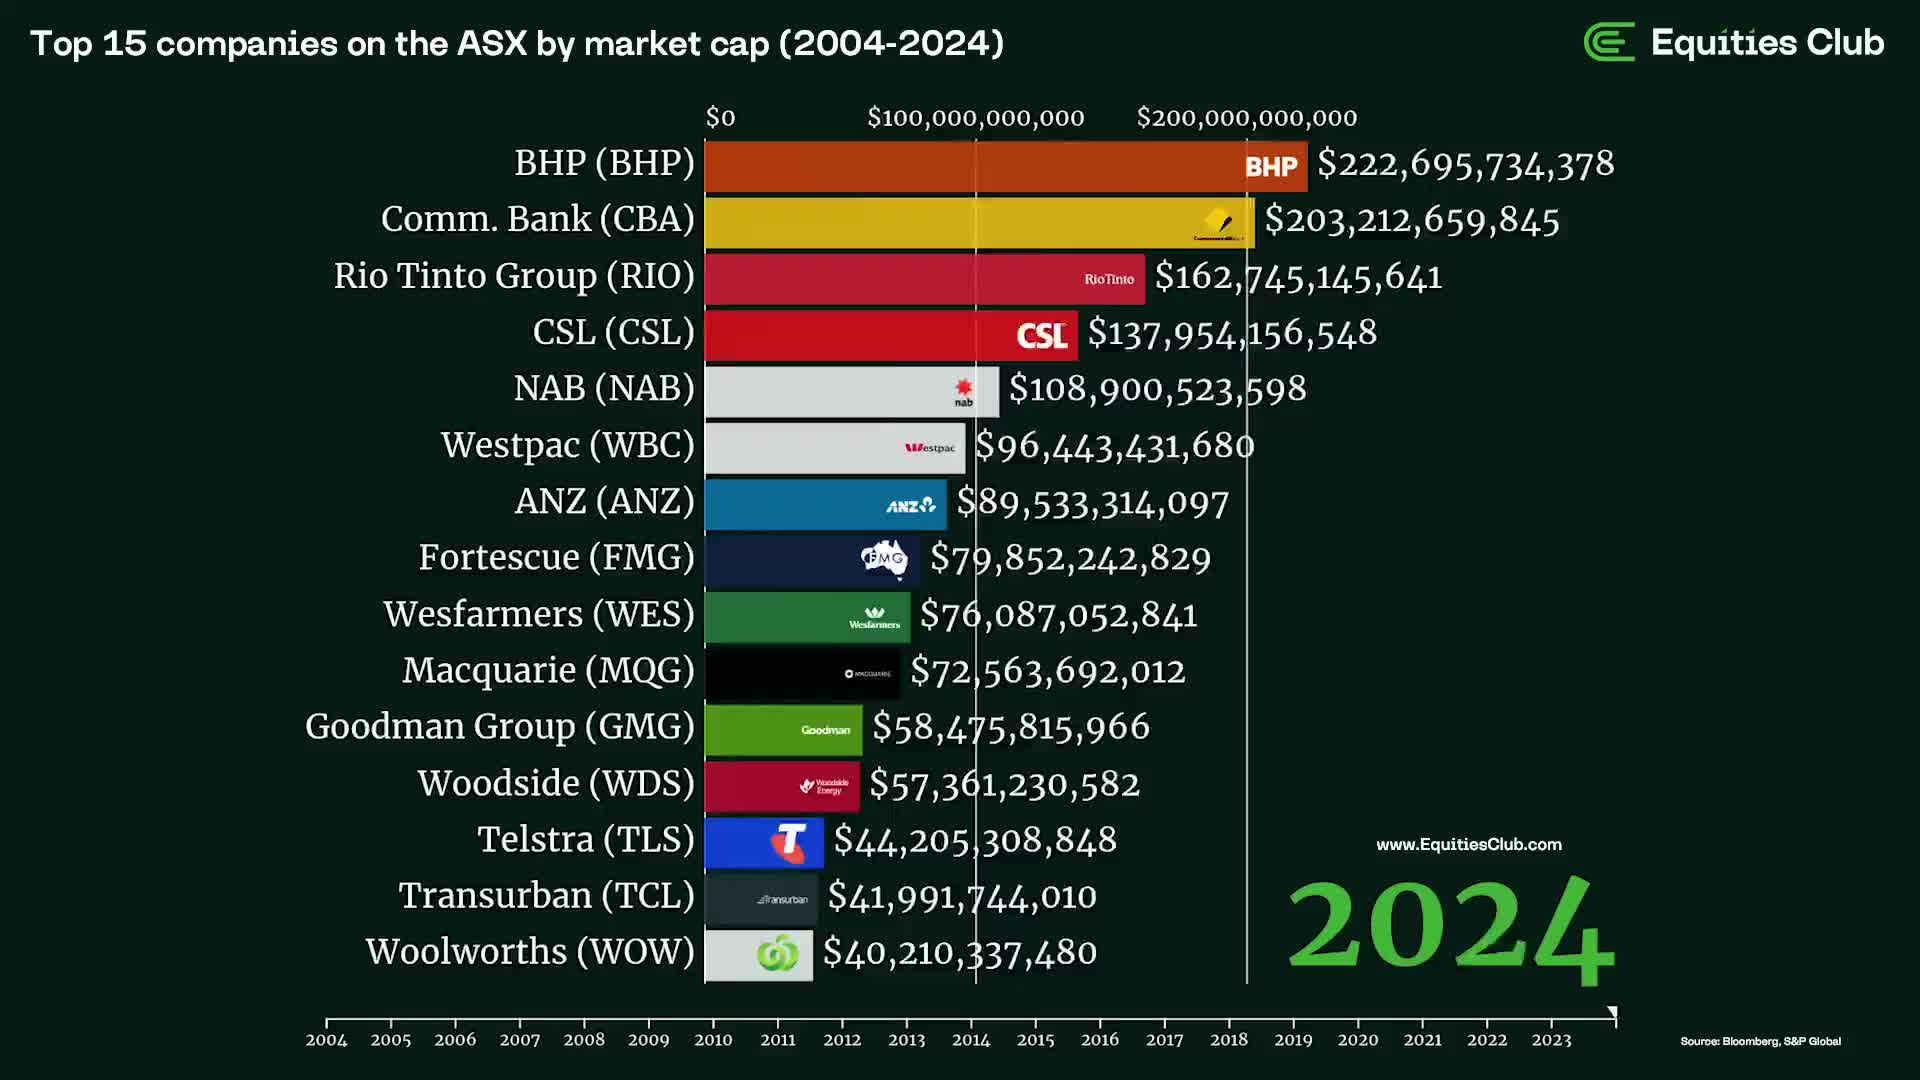 The Top 15 companies on the ASX by market capitalisation 2004-2024